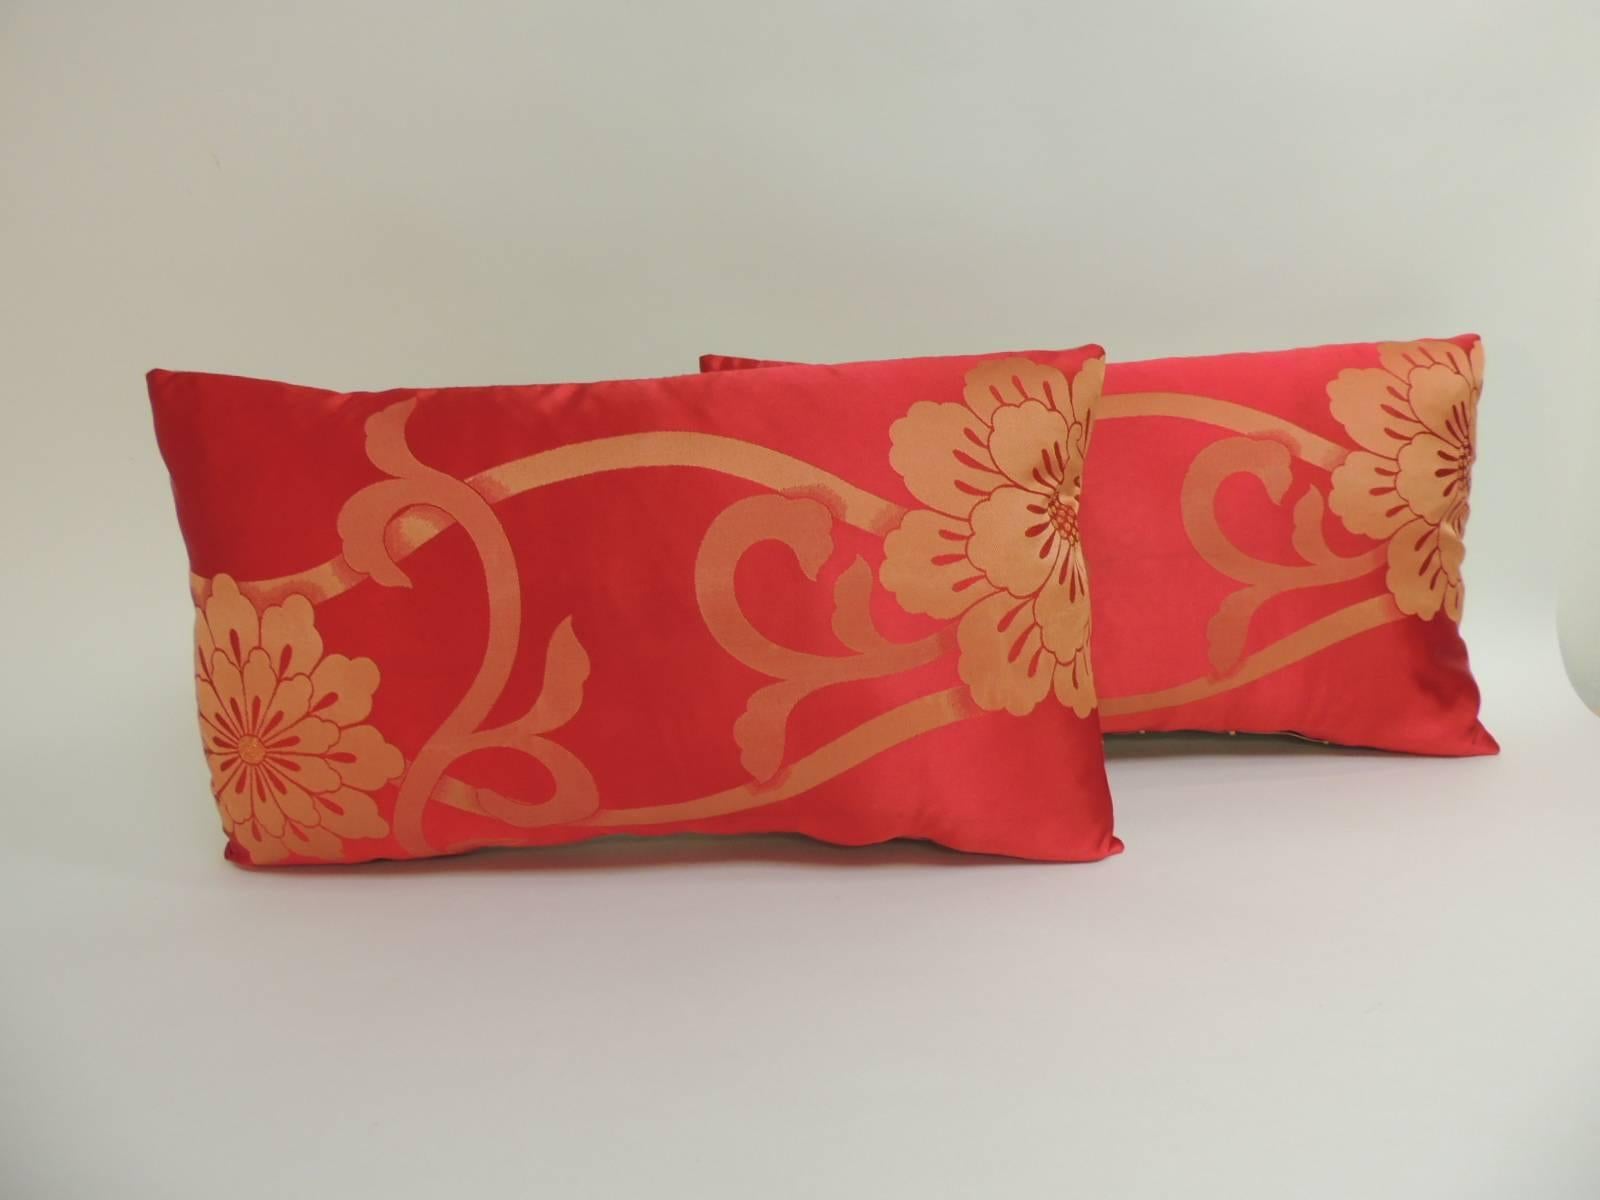 Gold and red floral woven silk floral Obi lumbar pillows. Decorative pillows motif depicting flowers in bloom with large flowers with vines and leaves. The front panel flowers are embroidered with gold metallic threads. Decorative lumbar pillows